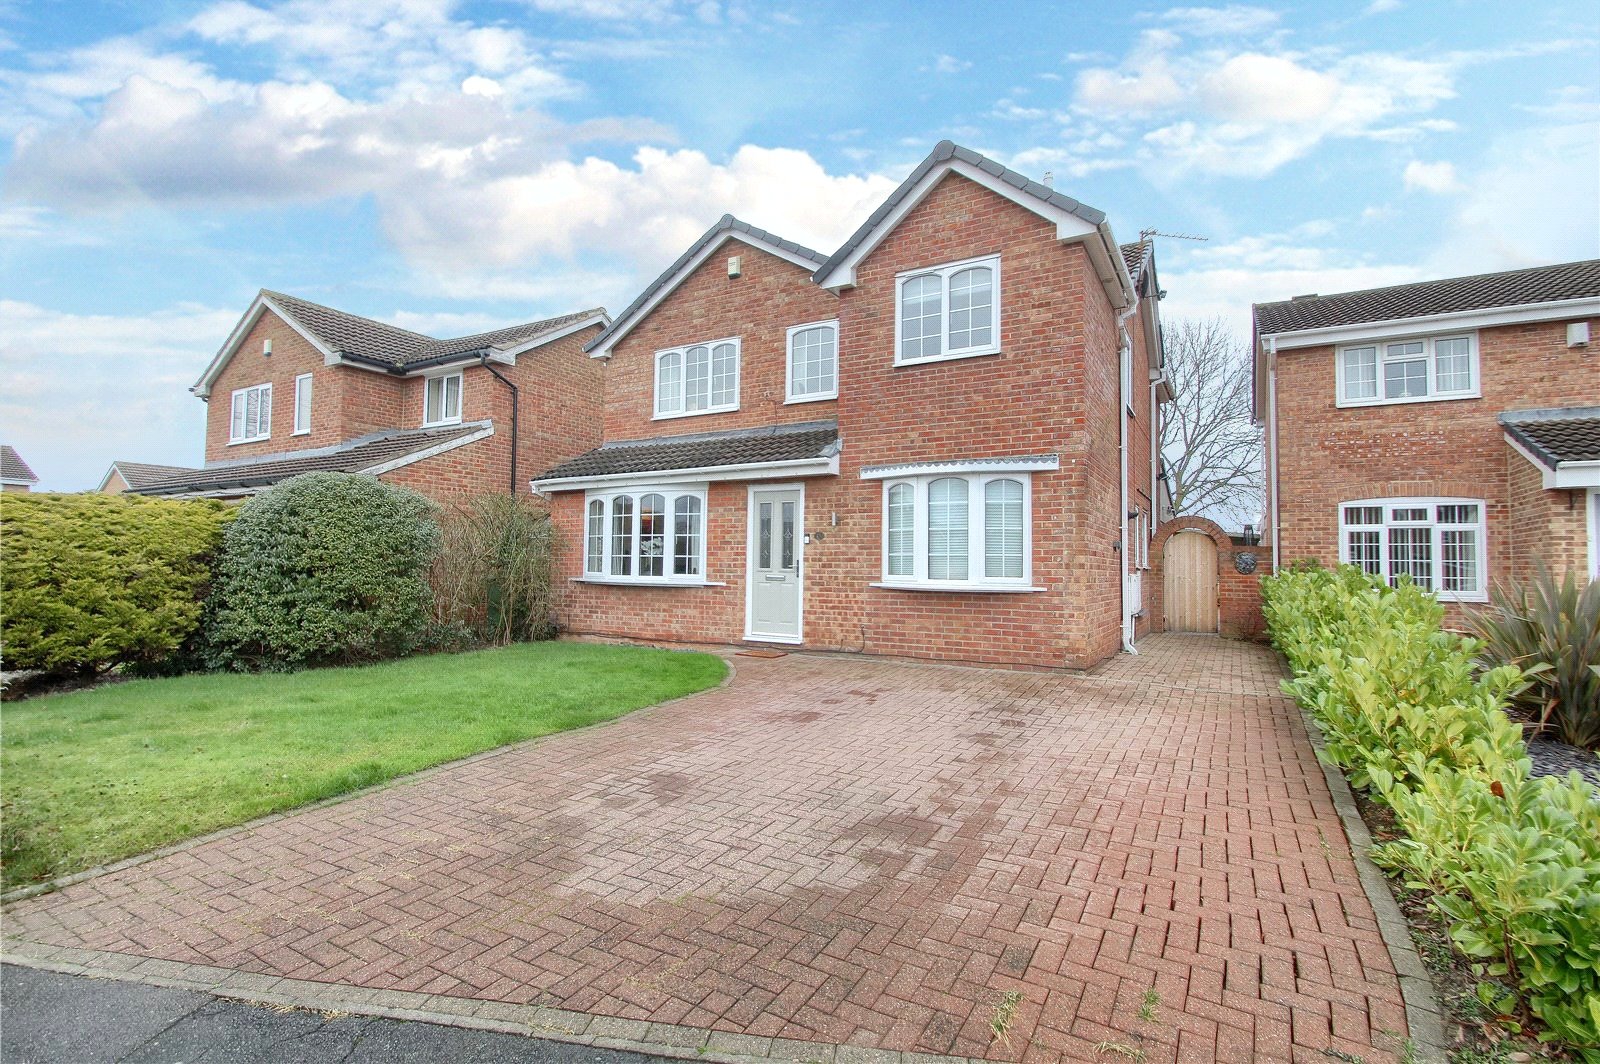 5 bed house for sale in Griffiths Close, Yarm 1